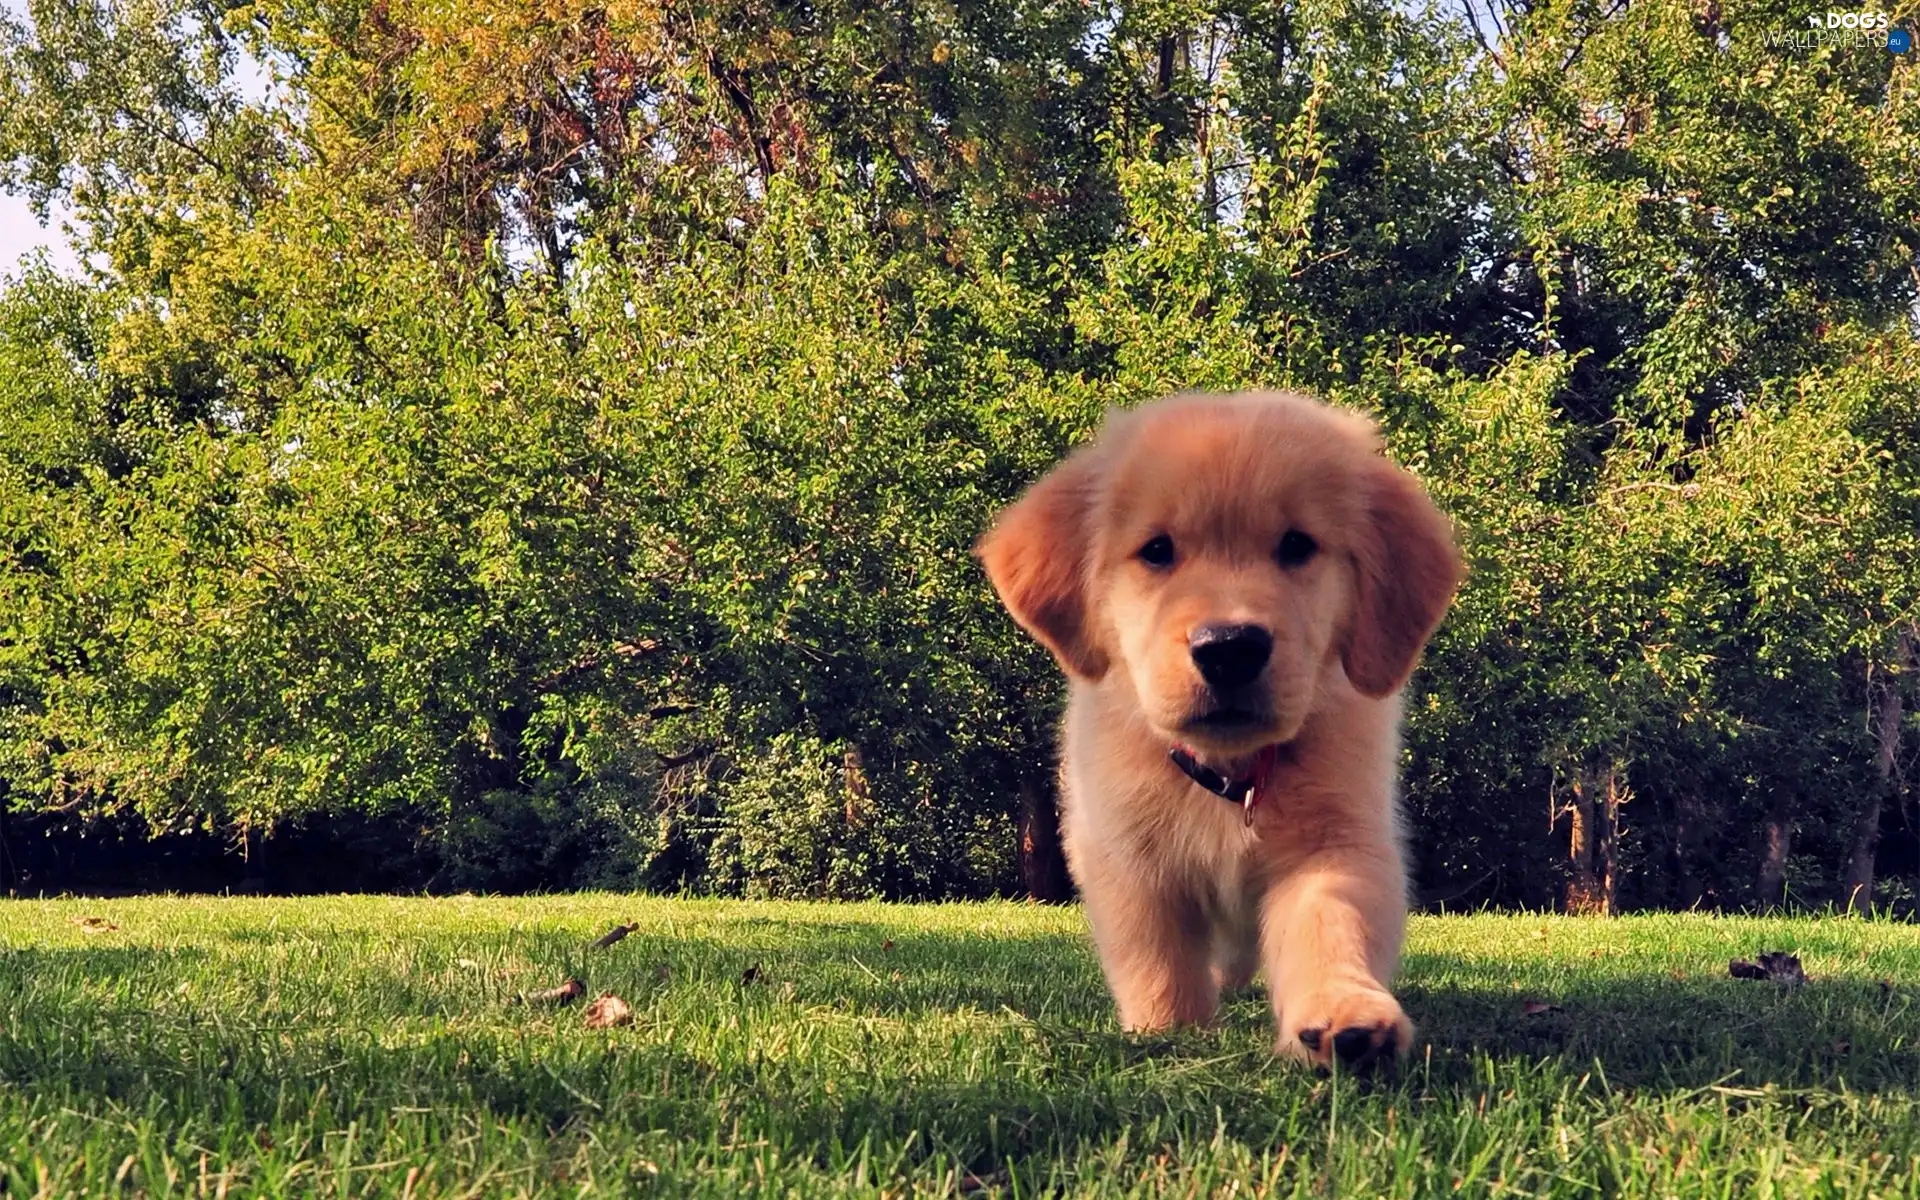 viewes, trees, Puppy, grass